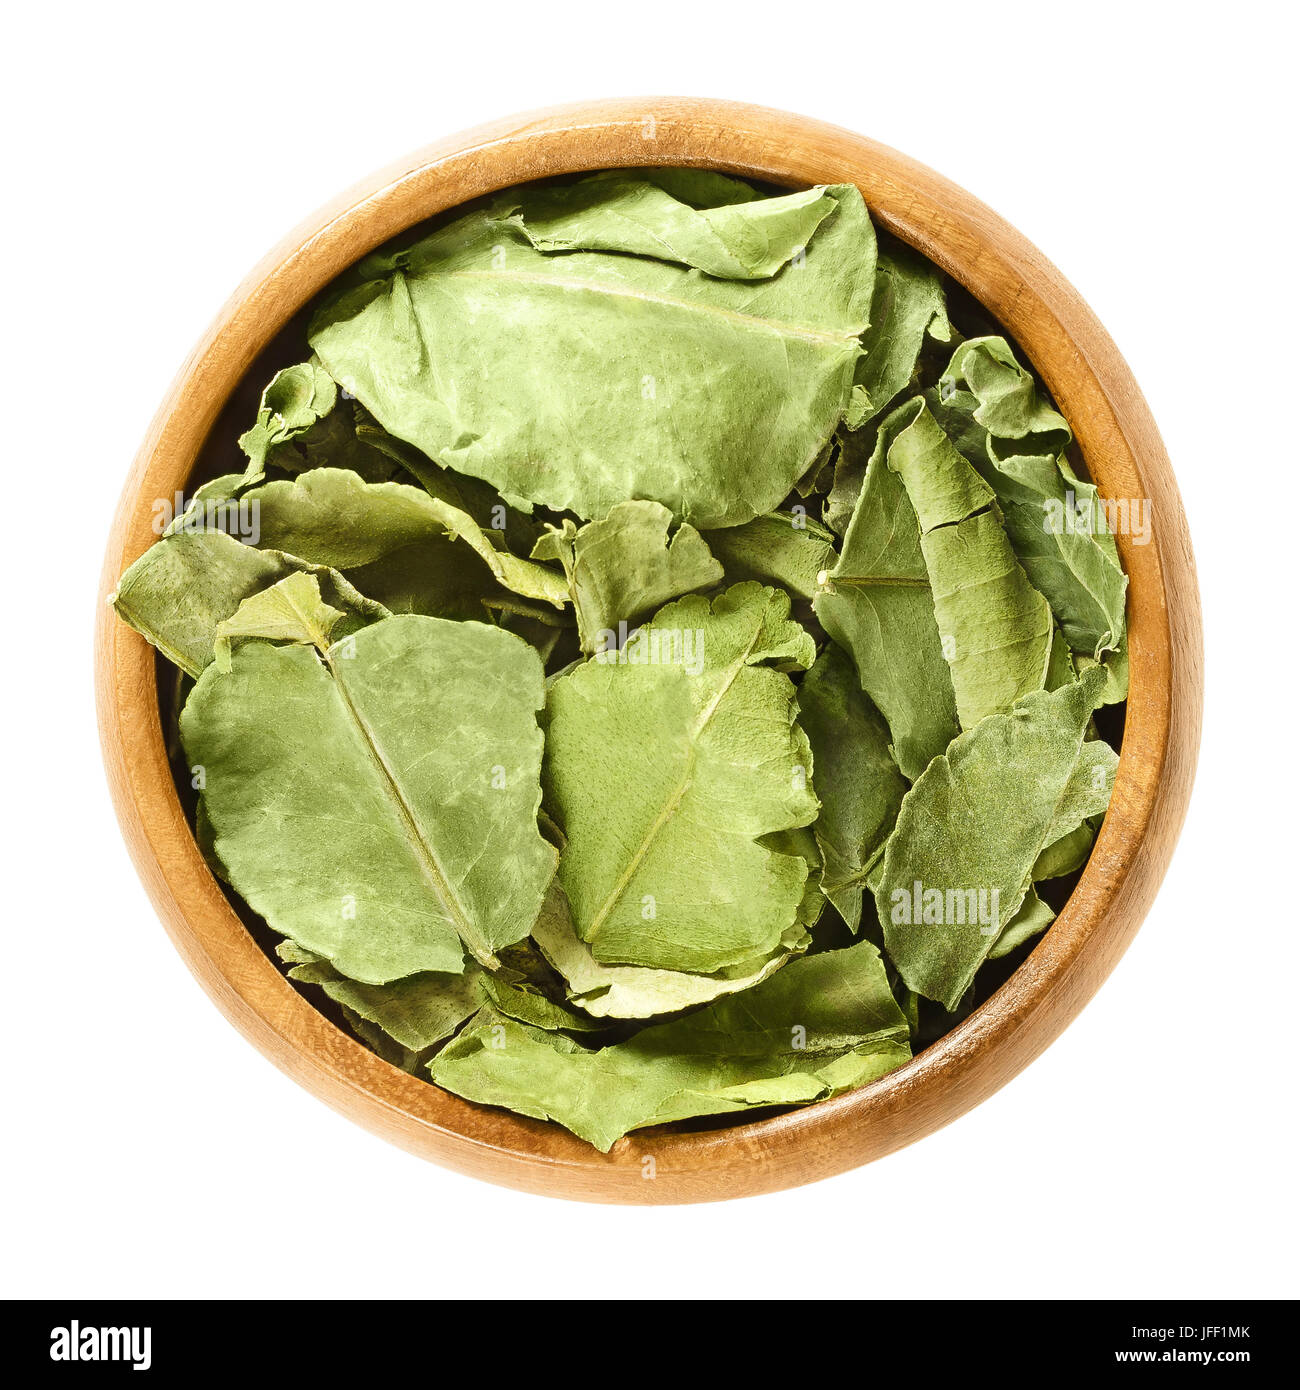 Dried kaffir lime leaves in wooden bowl. Green leaves of Citrus hystrix, also makrut lime or Mauritius papeda. Asian citrus fruit plant. Stock Photo